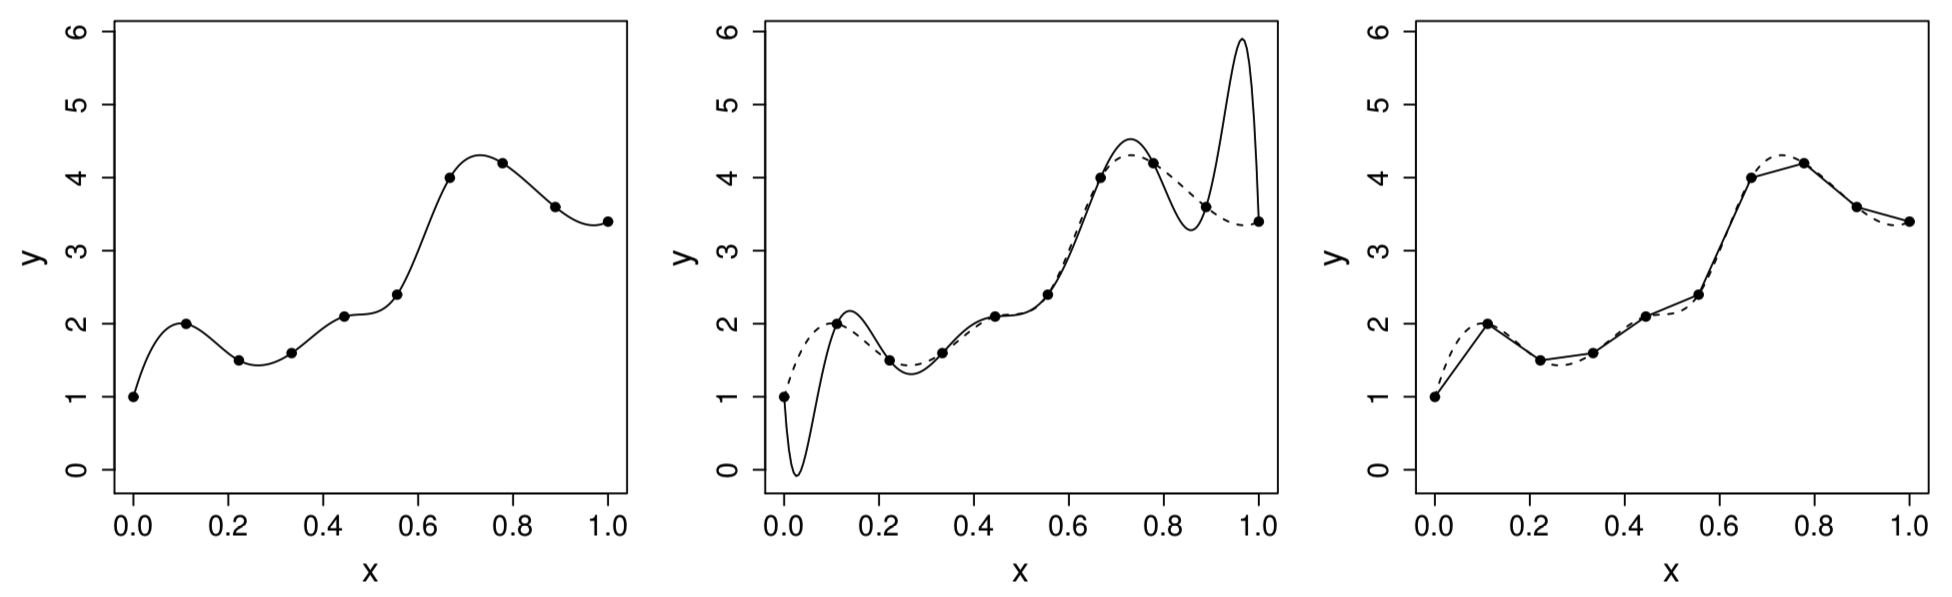 Left: the target function $f(x)$. Middle: polynomial interpolation. Right: piecewise linear interpolant